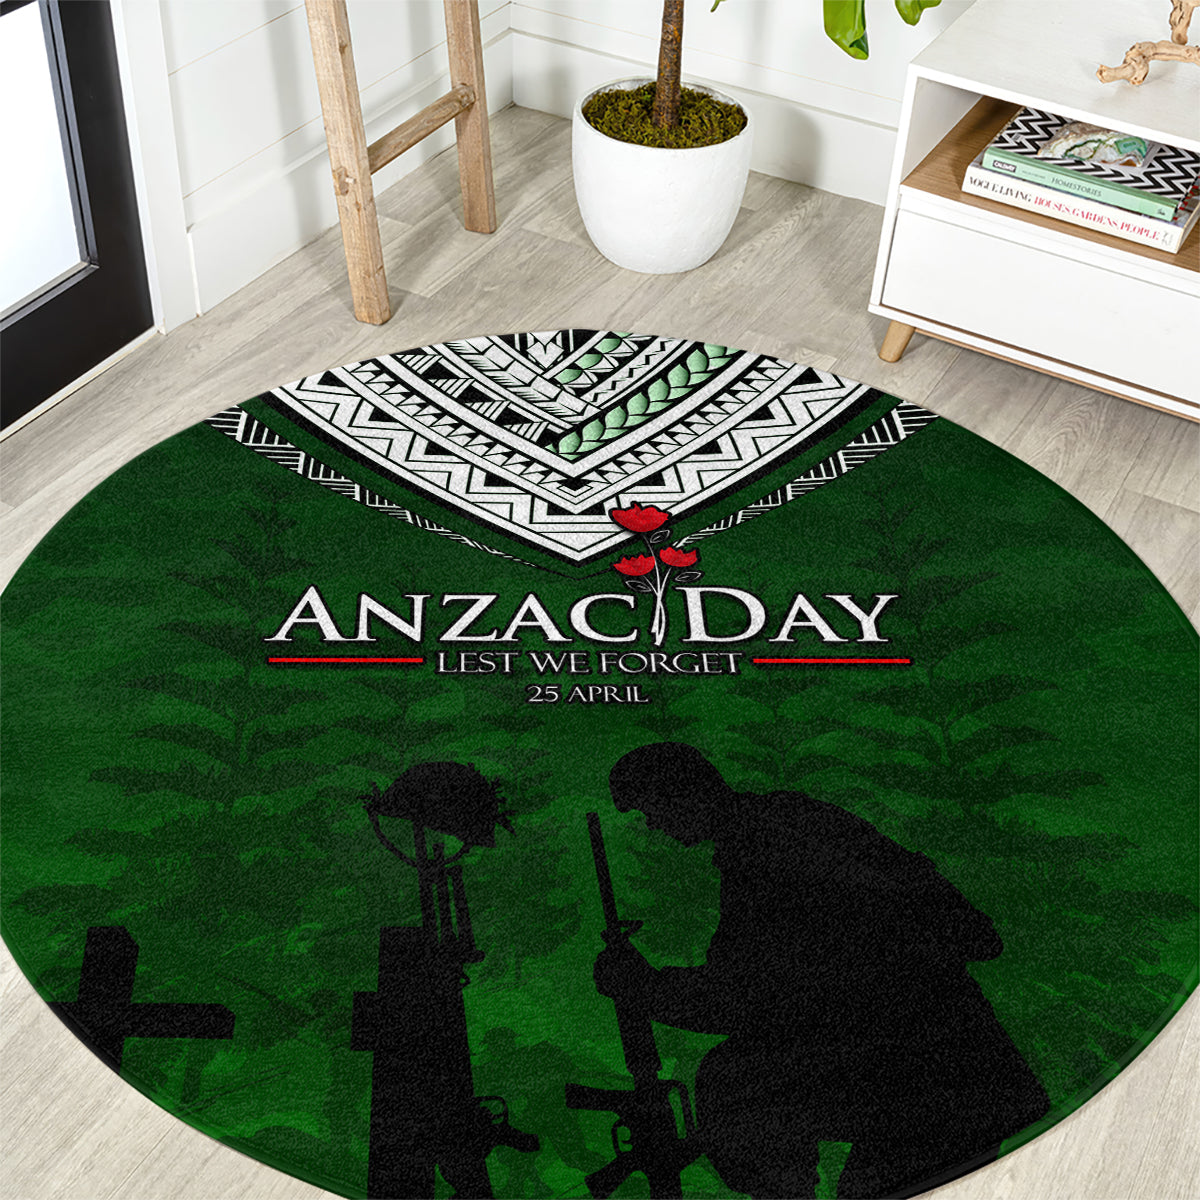 Norfolk Island ANZAC Day Round Carpet Soldier Lest We Forget Camouflage LT03 Green - Polynesian Pride